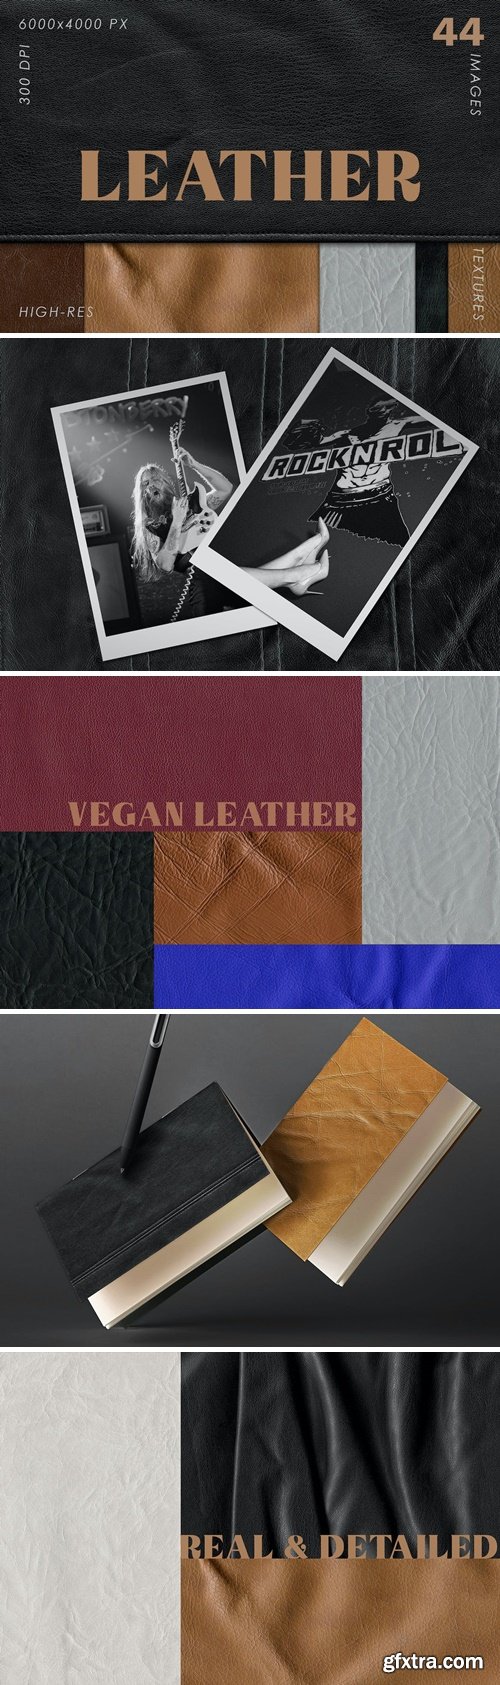 Natural & Vegan Leather Textures 72FNST9